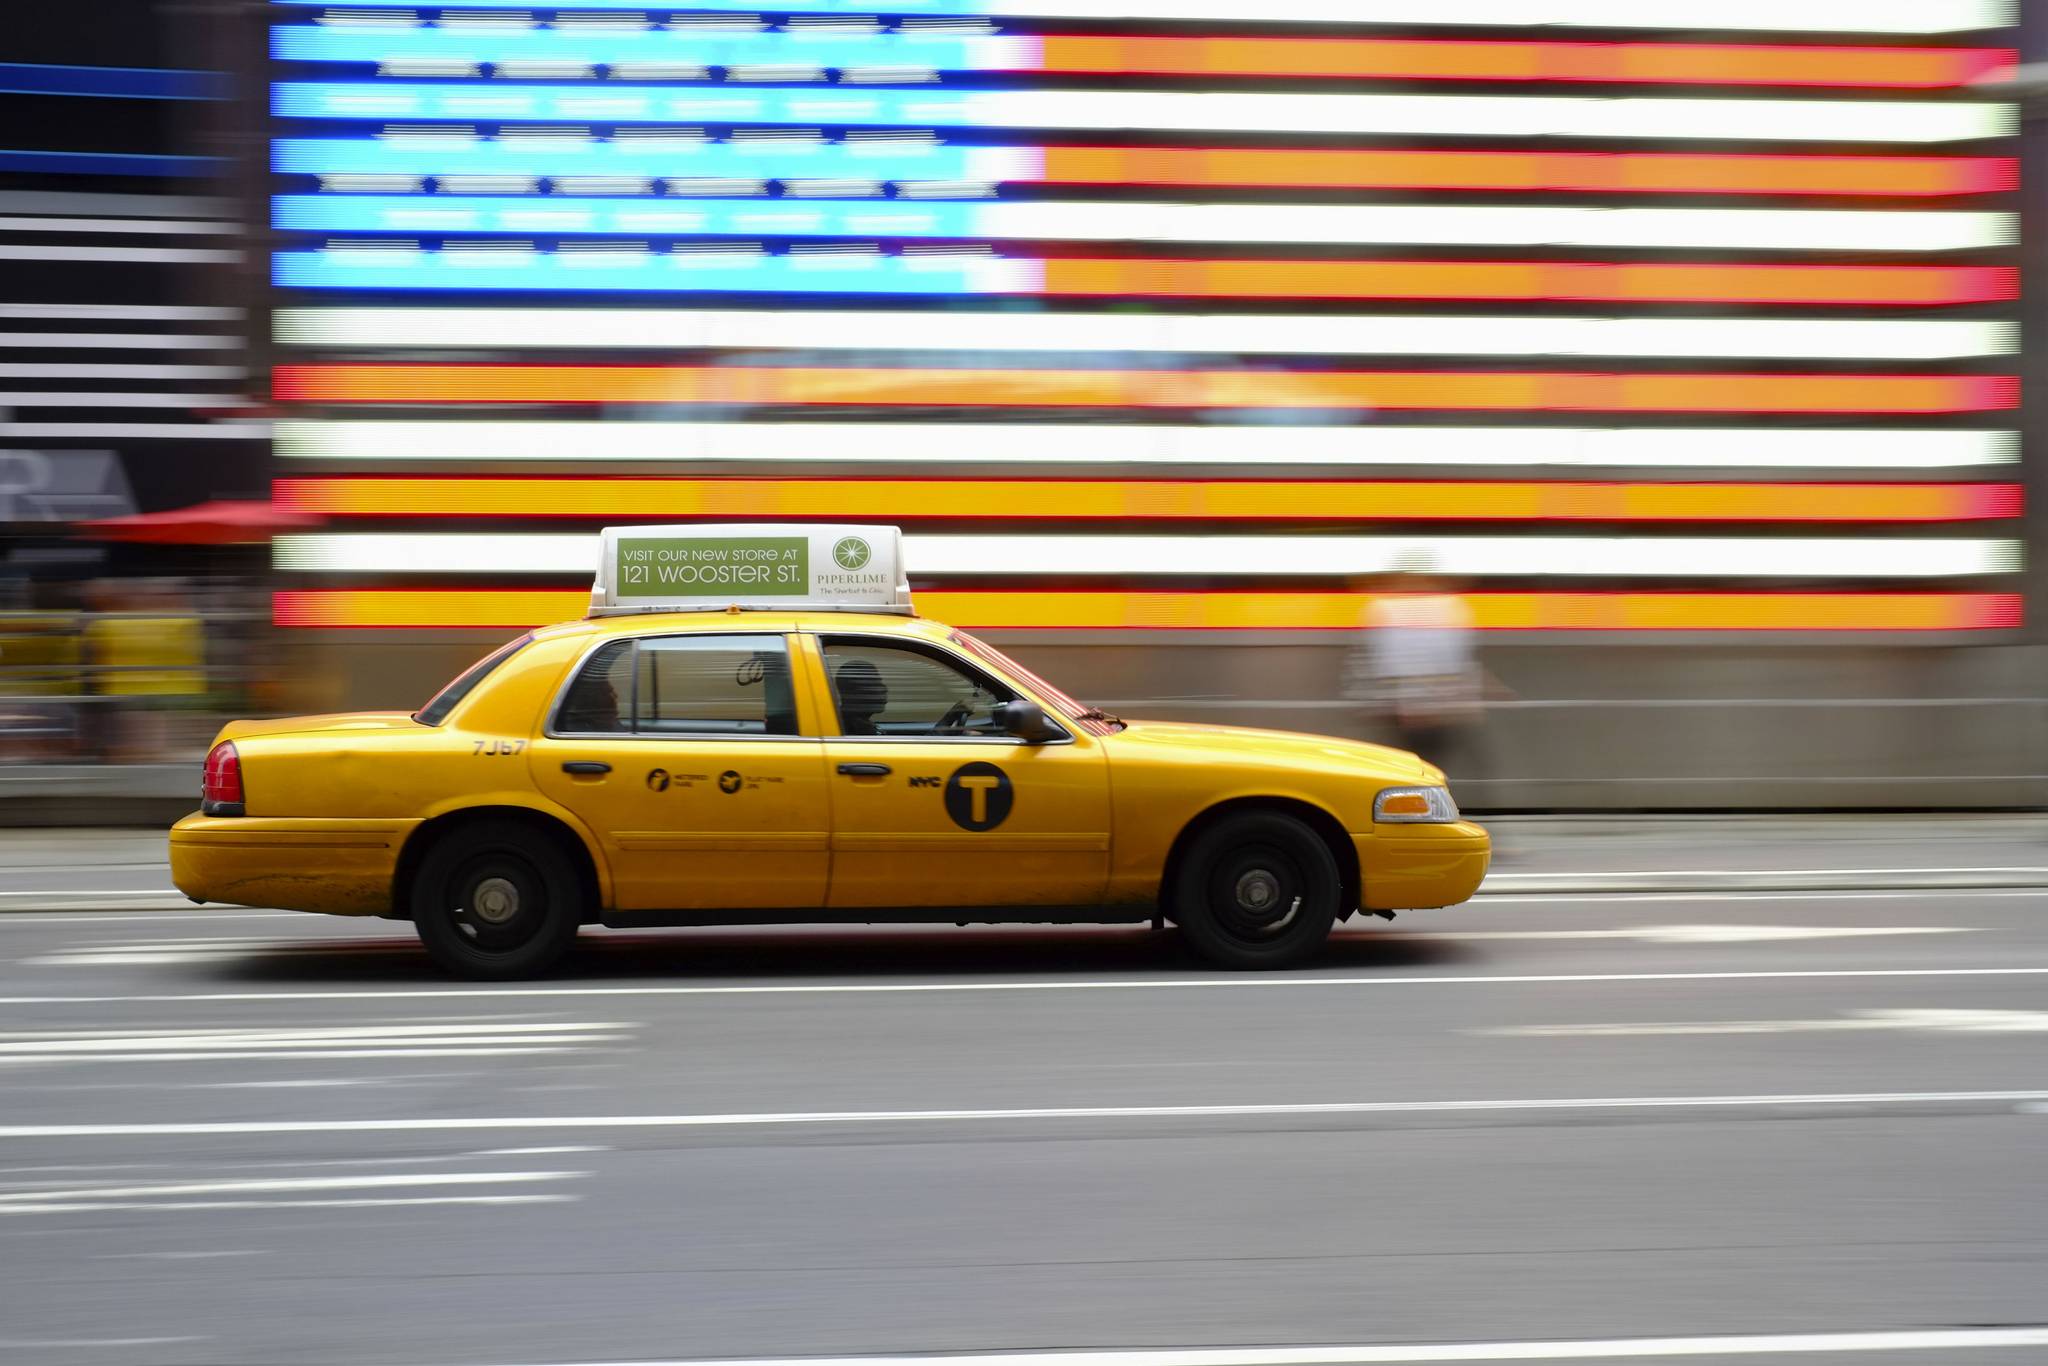 Arro upgrades the traditional NYC taxi